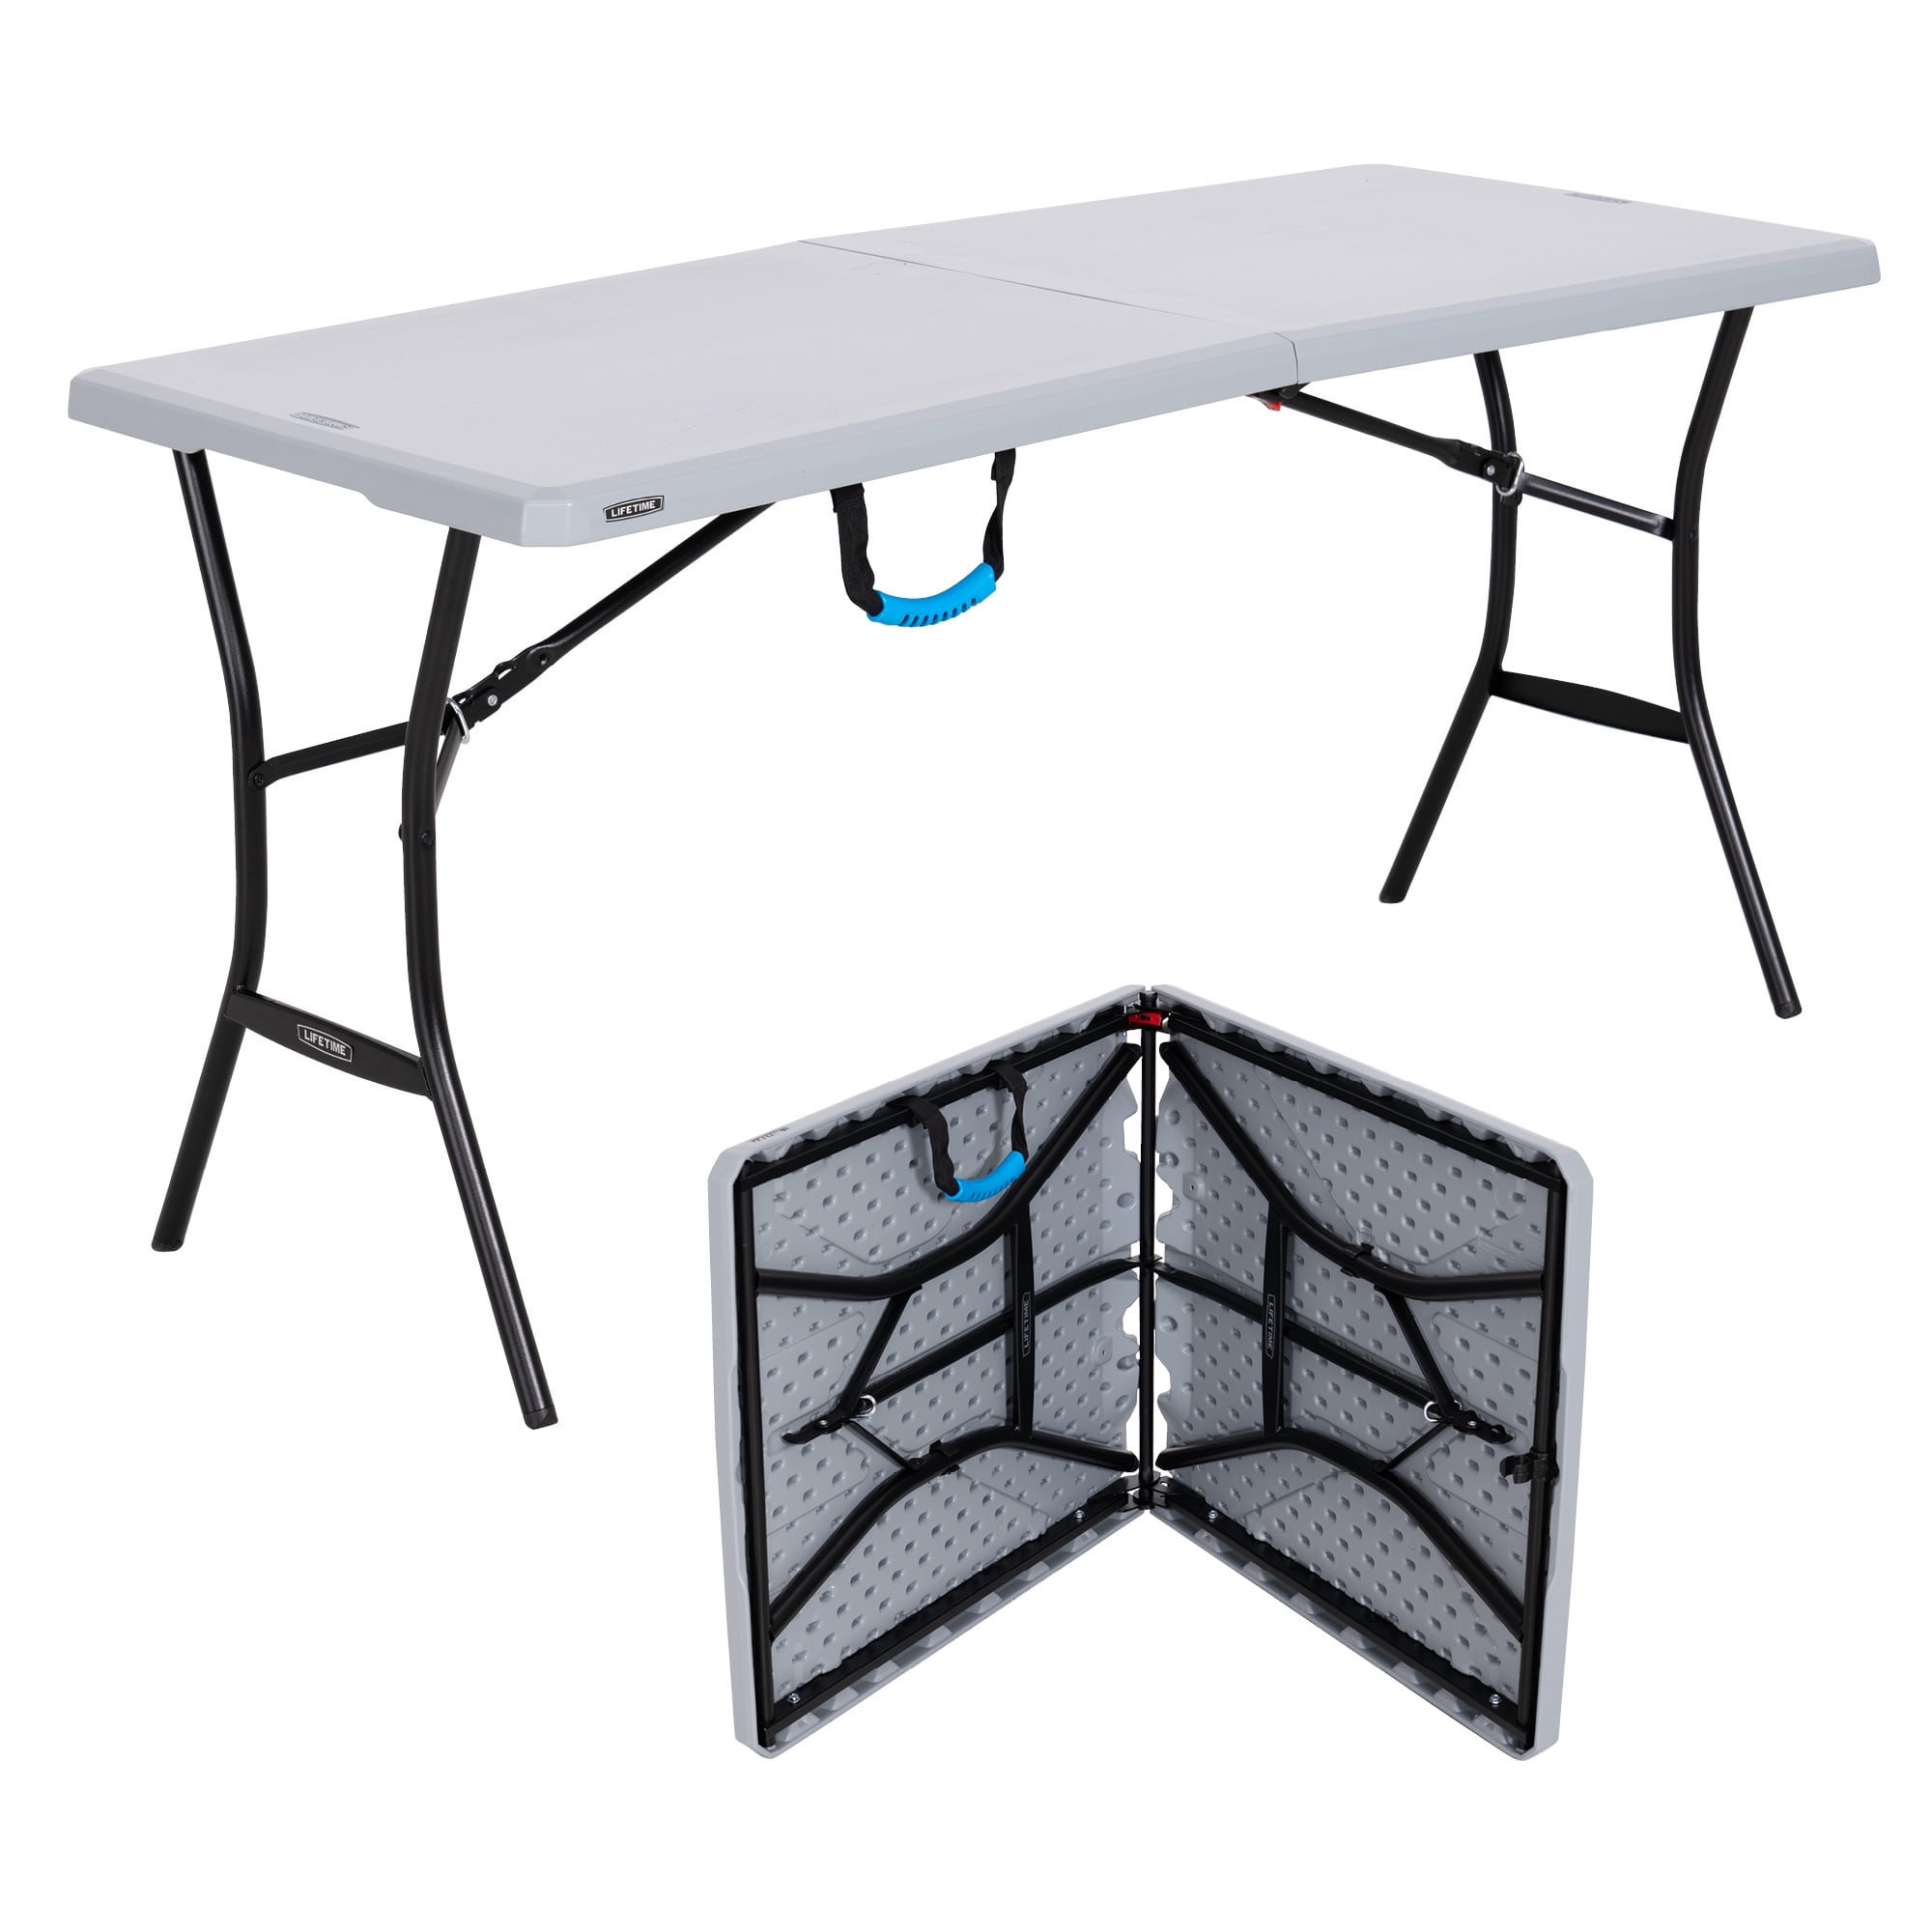 5' Lifetime Folding Tailgating Camping & Outdoor Table $45 + Free Shipping